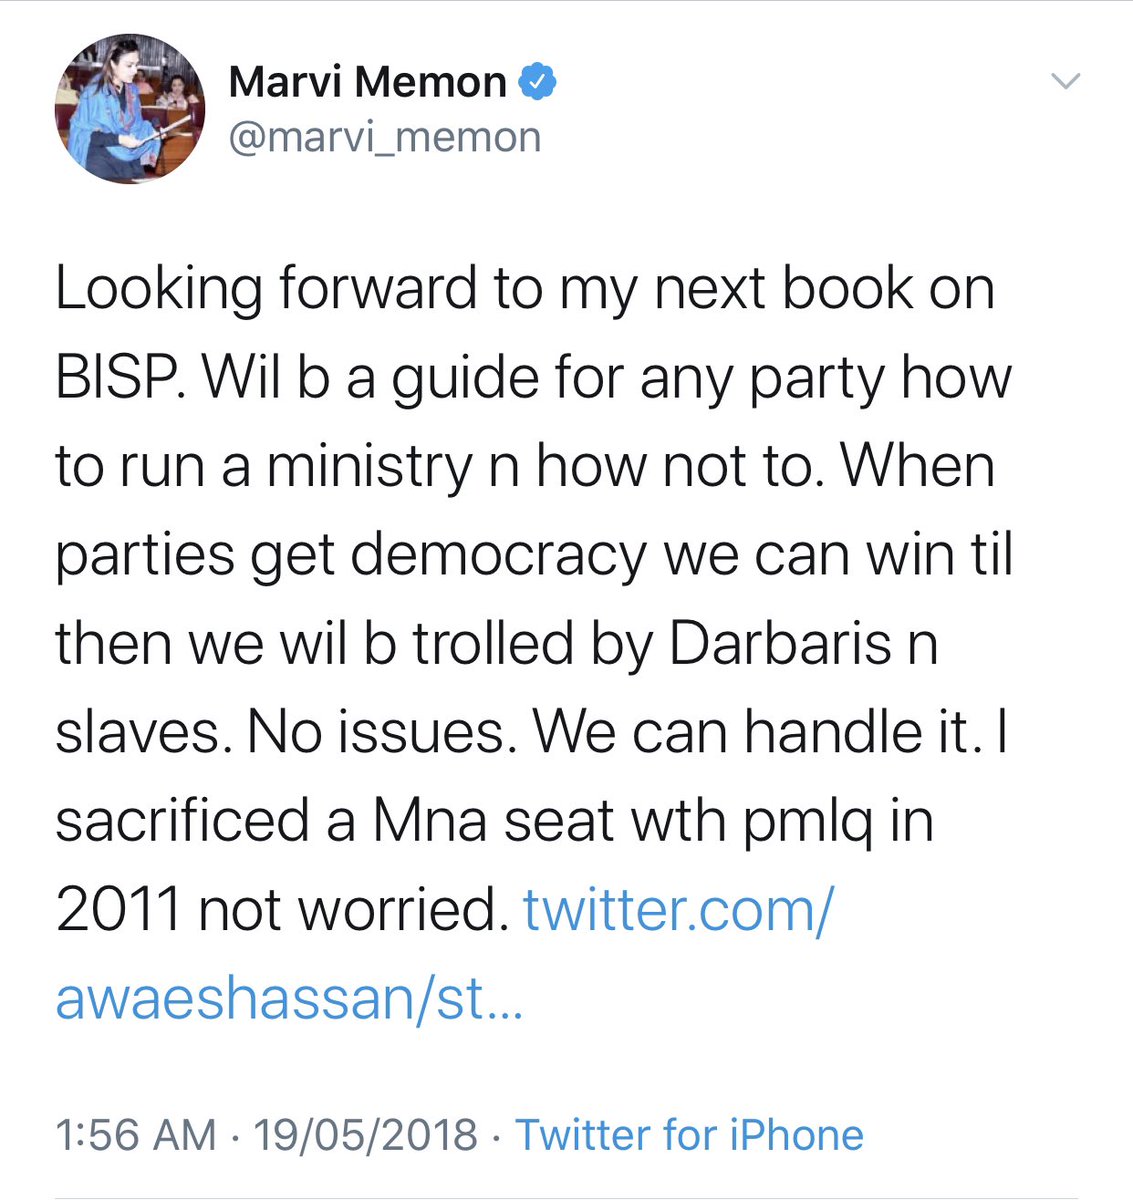 It’s only after falling out with Pmln,their Nominated Chairperson BISP jeers at Pmln leadership,promising to write a book on program & scope without political intervention as well as accusing Pmln of non-democratic practices.